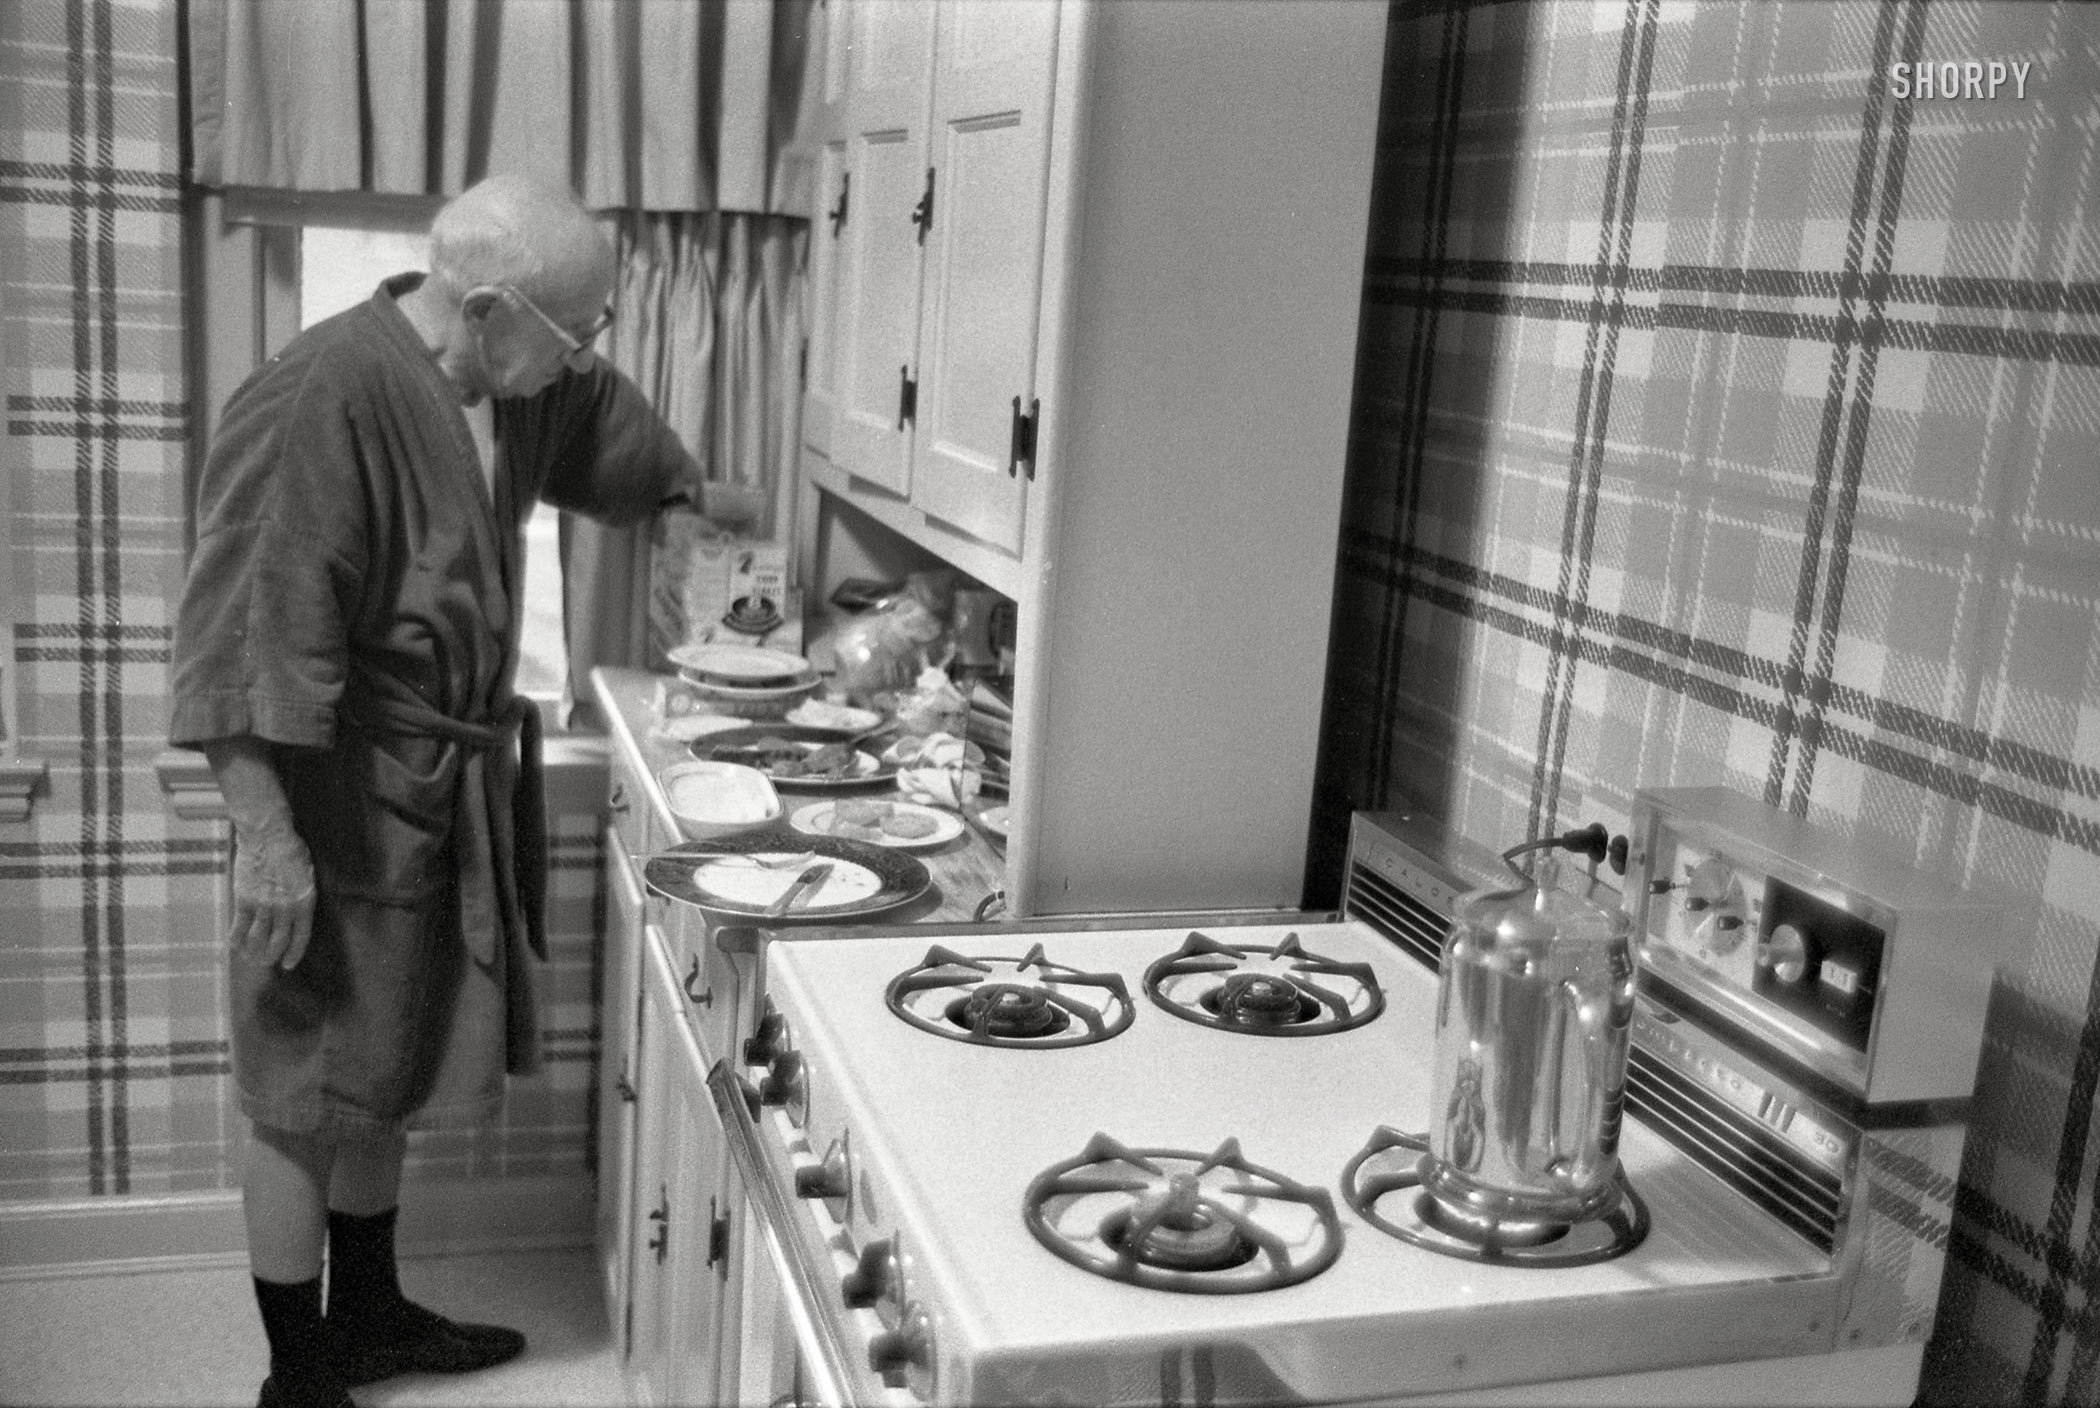 August 1968. Los Angeles. "Actor Jimmy Durante in his kitchen with corn flakes and dirty dishes on counter." 35mm negative from photos by Bob Lerner for the Look magazine assignment "Pinocchio Lives!" View full size.